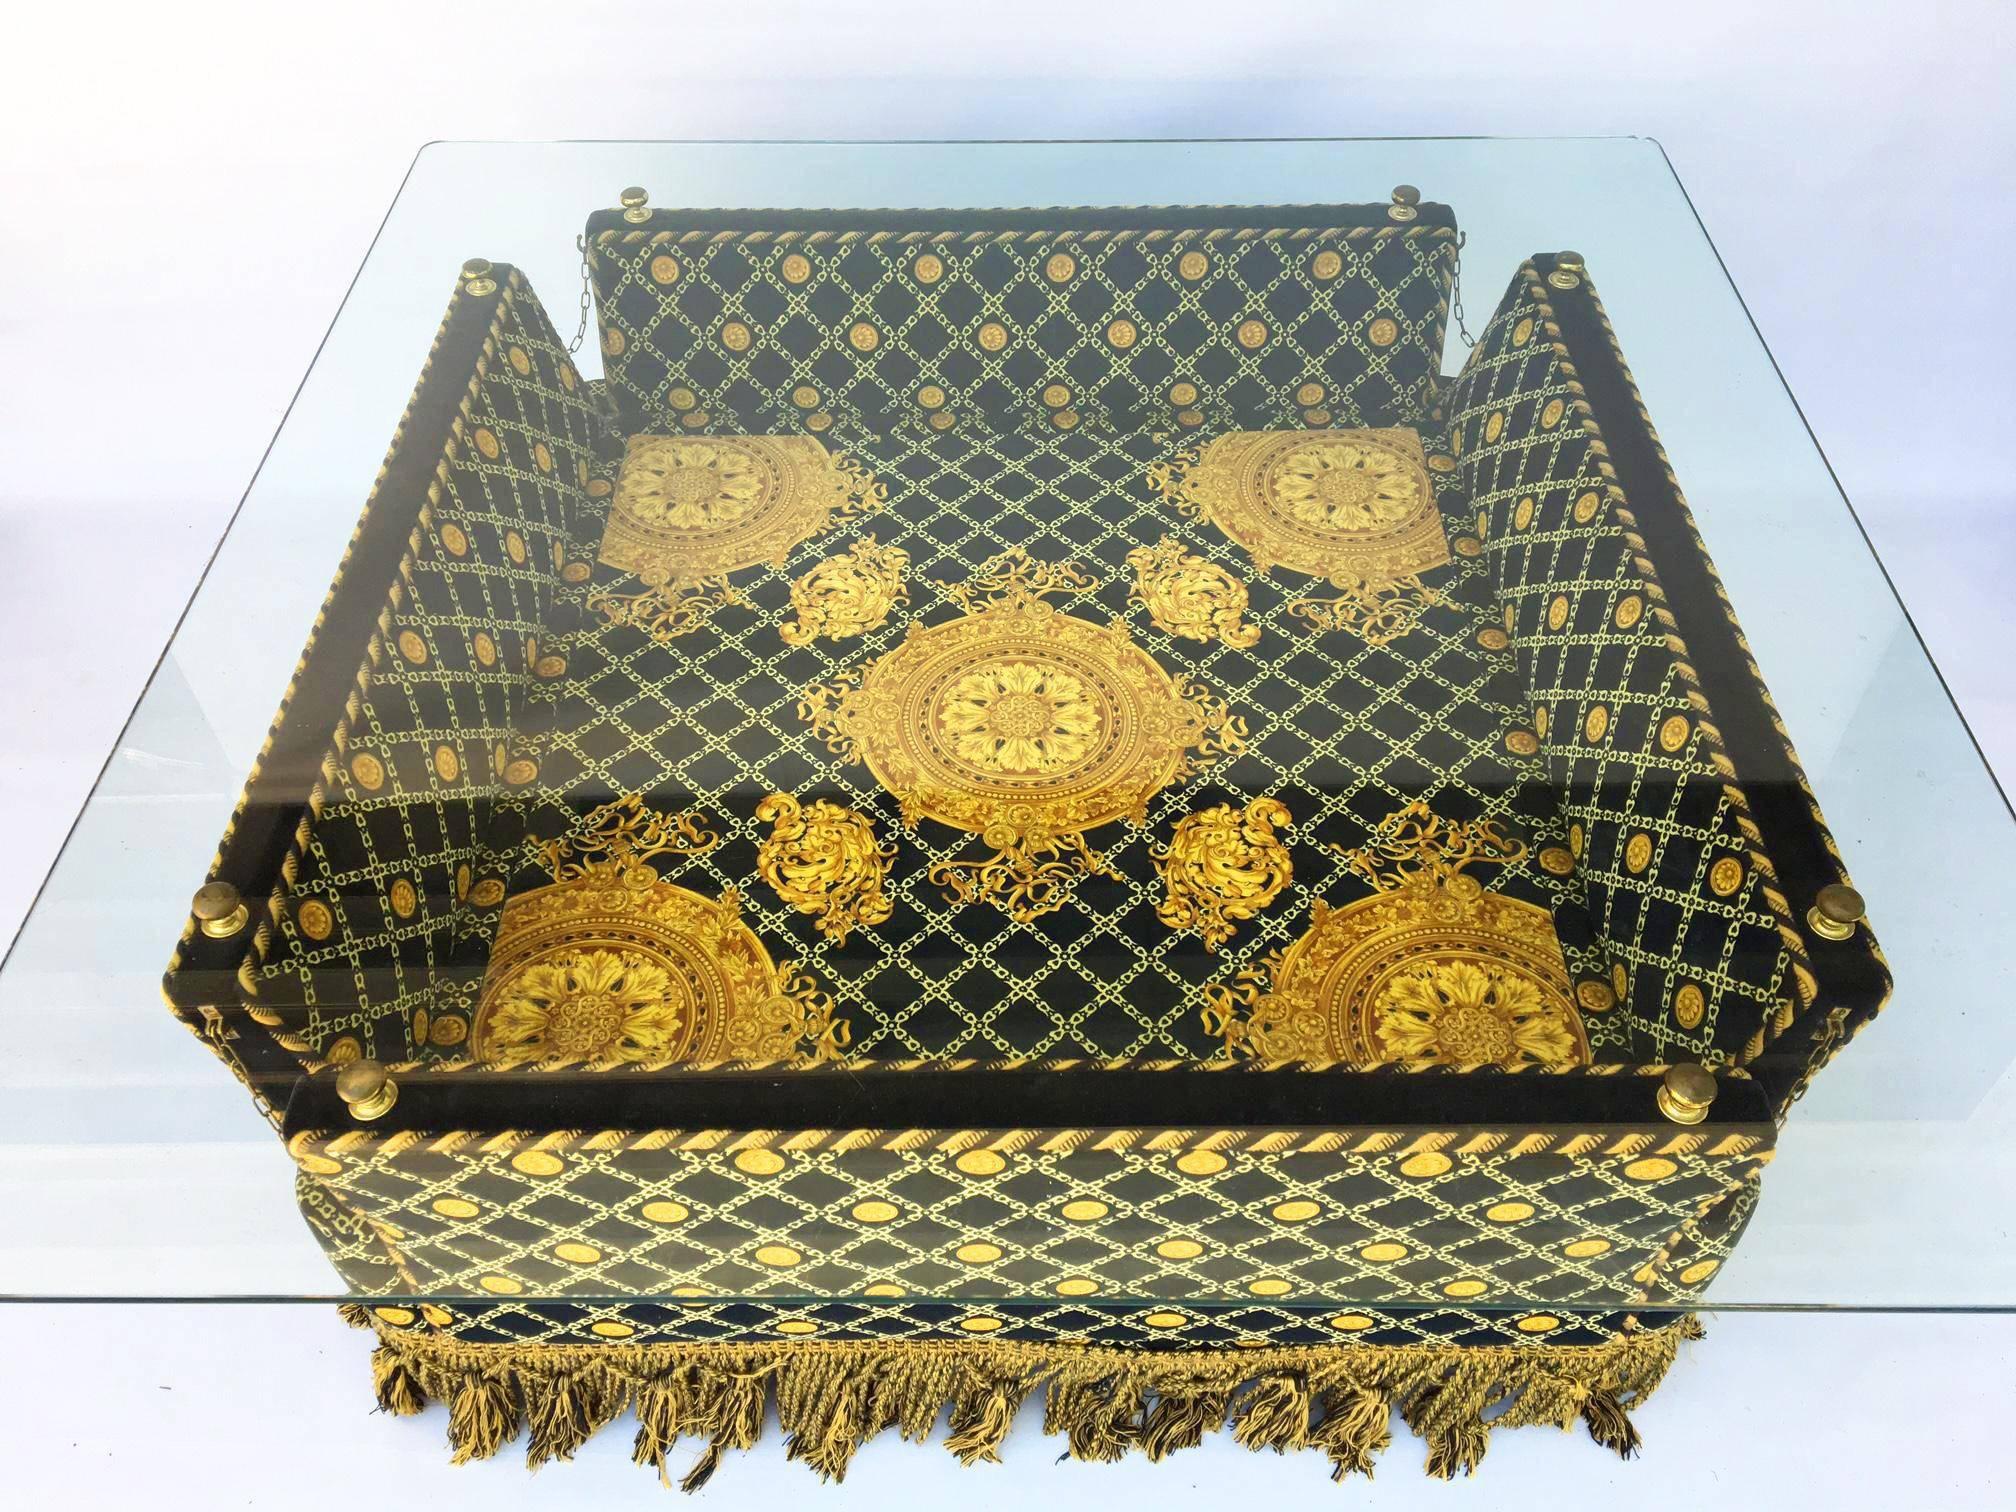 Versace style plush fabric adorns this unique glass-topped coffee table. Features construction reminiscent of Knole style settees with it's flared side arms and brass finials. Marked Stefano Giovanni (Jiovanni) and made in Italy. Excellent vintage